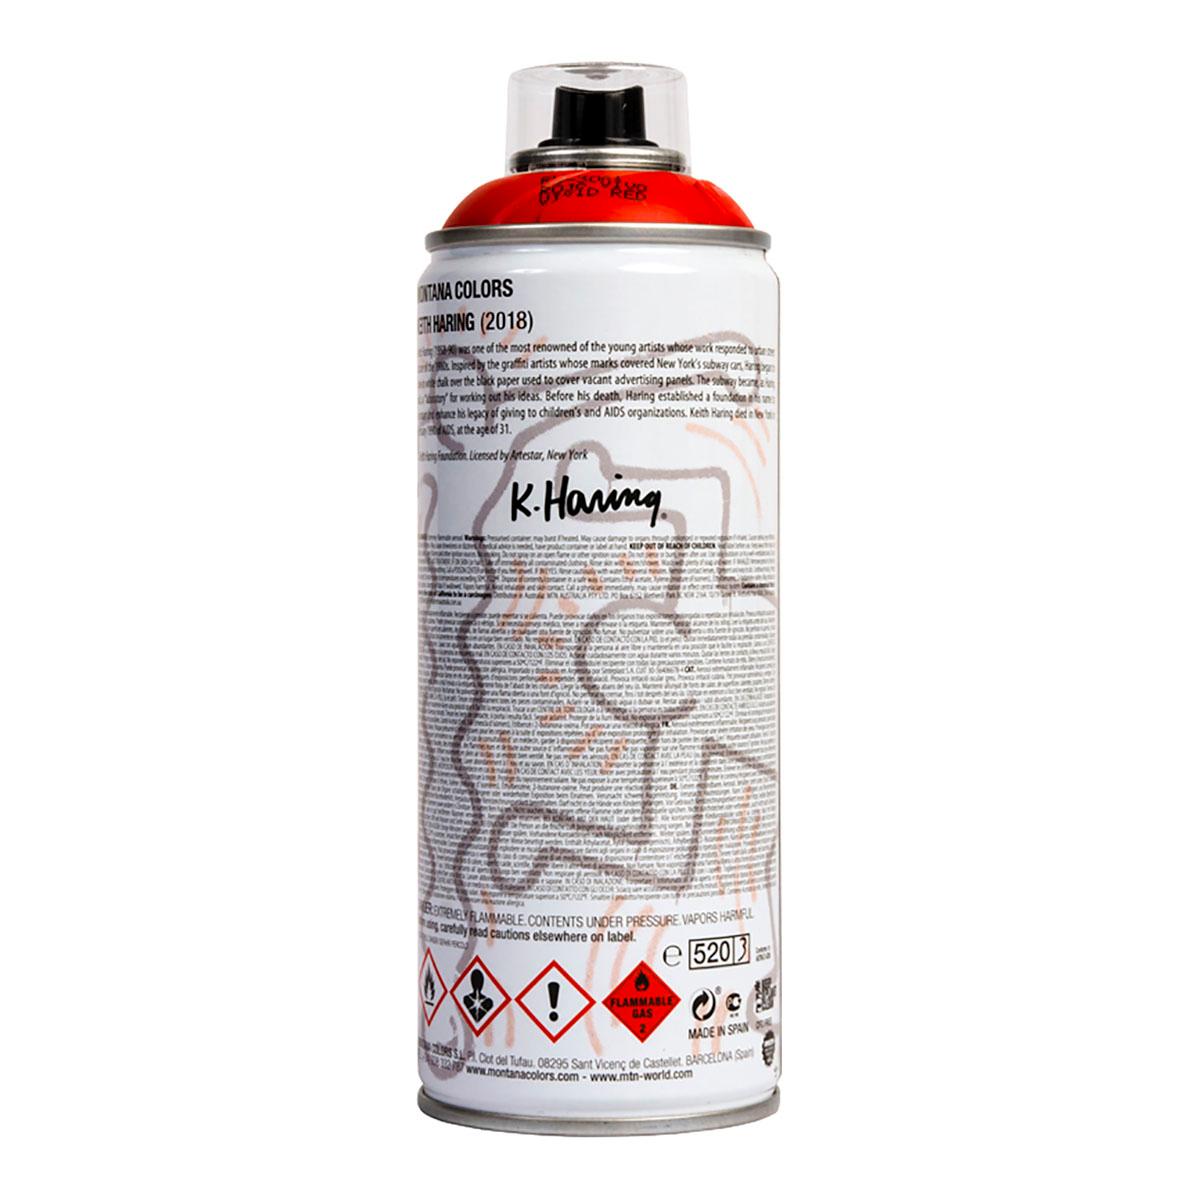 Limited edition Keith Haring spray paint can - Street Art Print by (after) Keith Haring